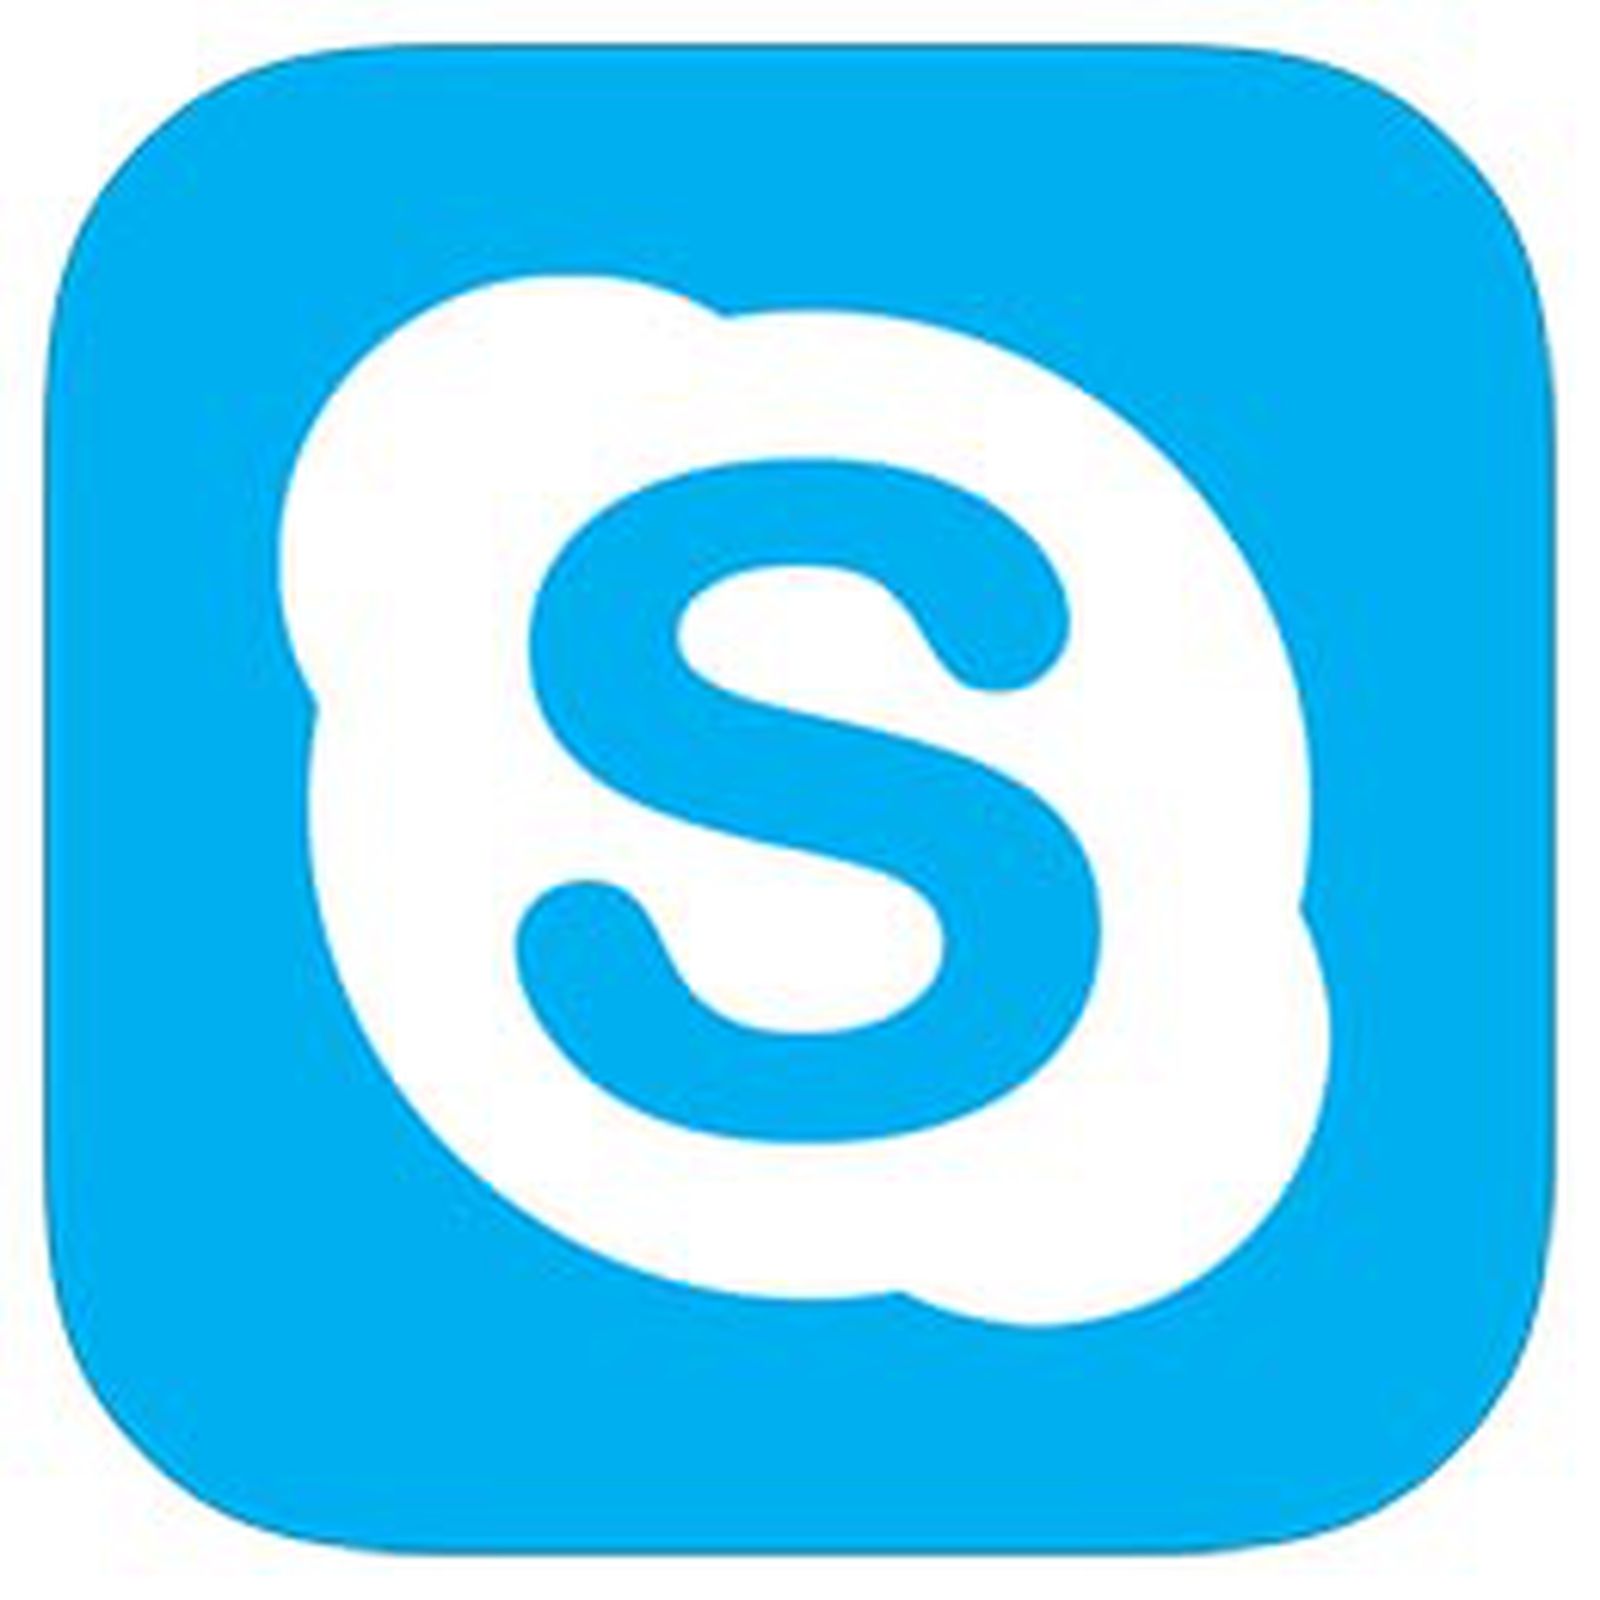 Mac skype for business download